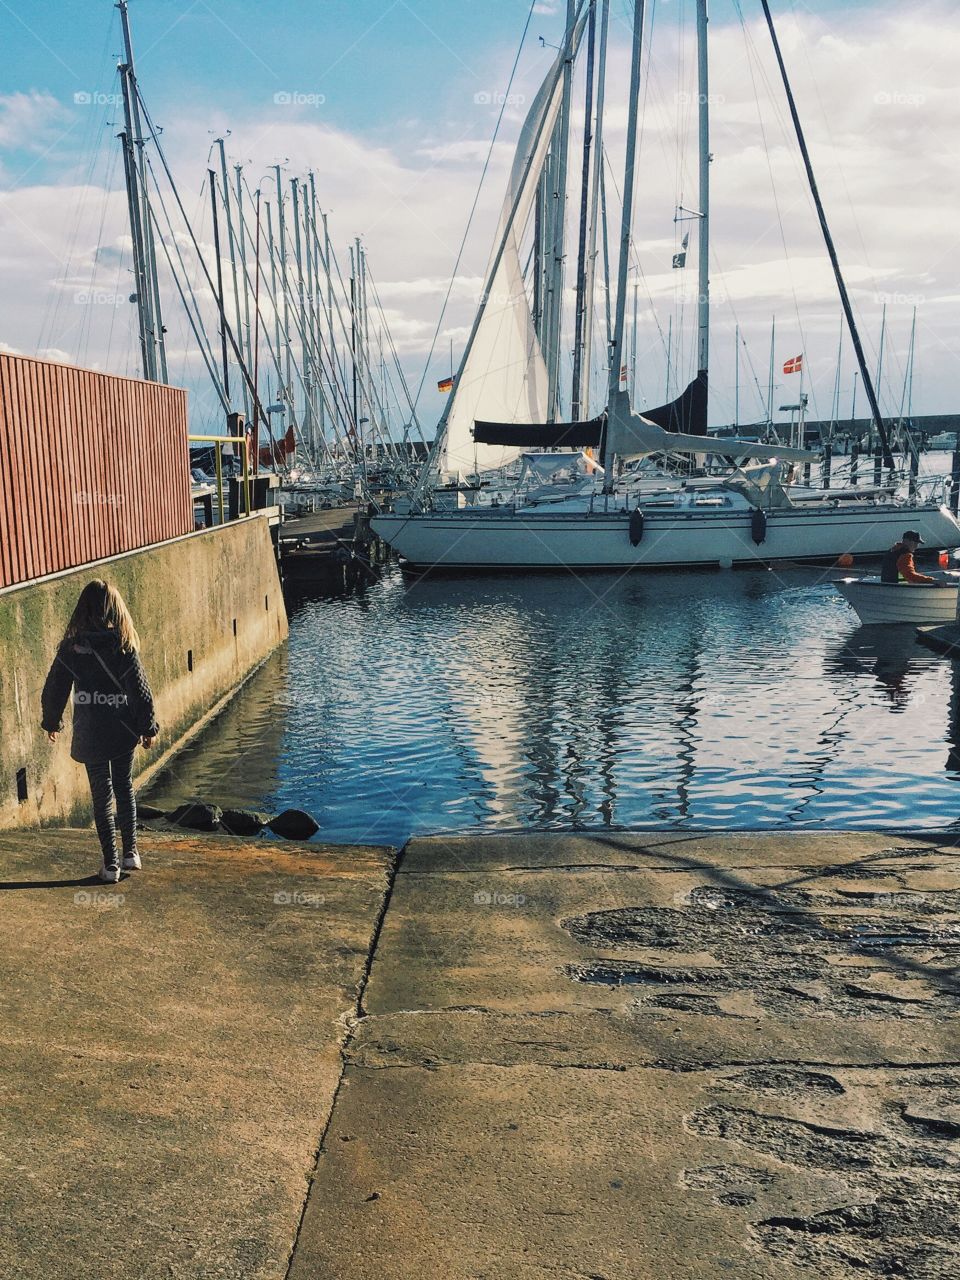 A girl walking in the harbor full of sailingboats